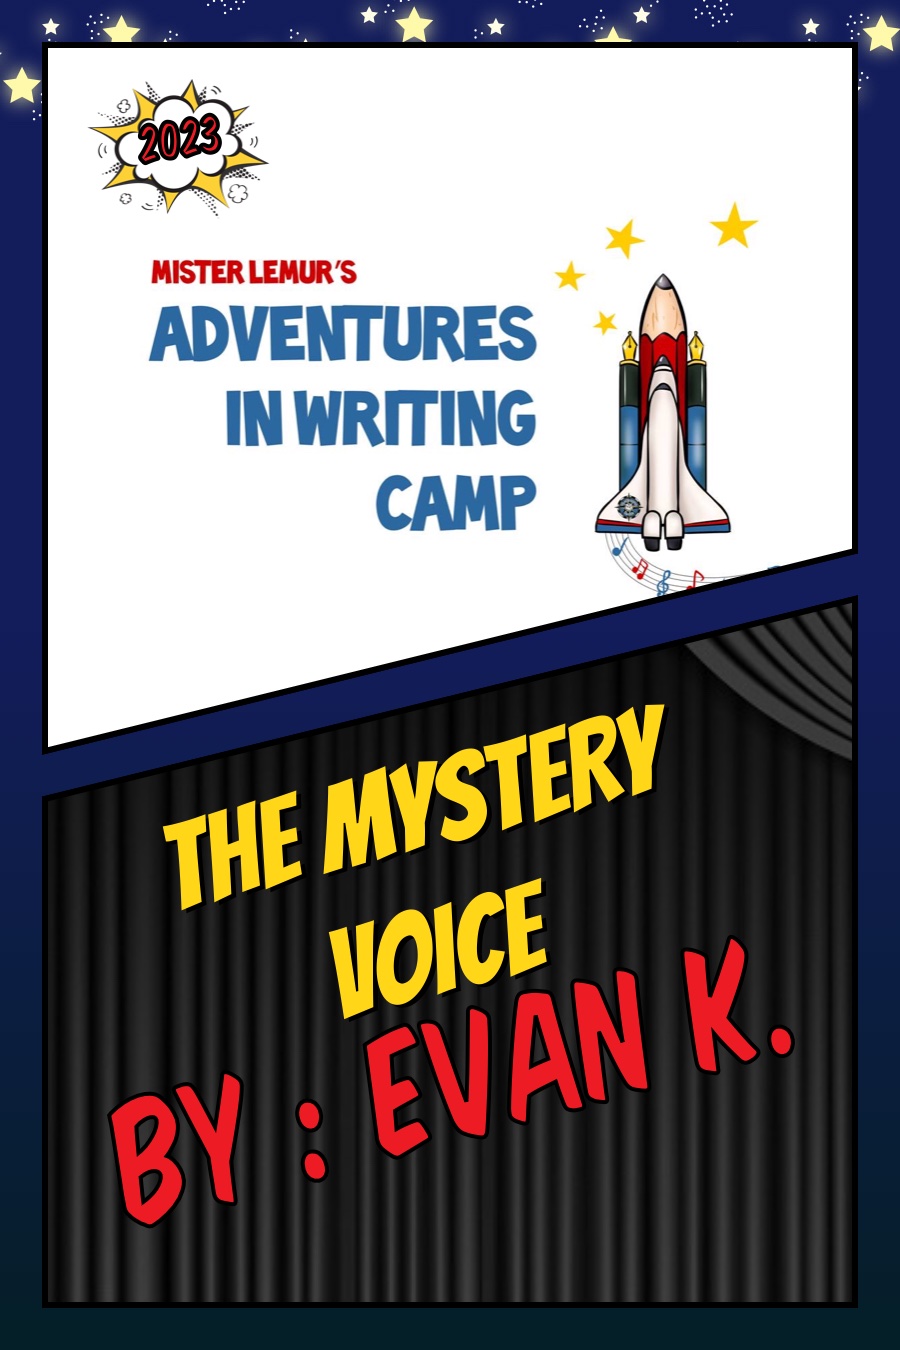 The Mystery Voice by Evan K